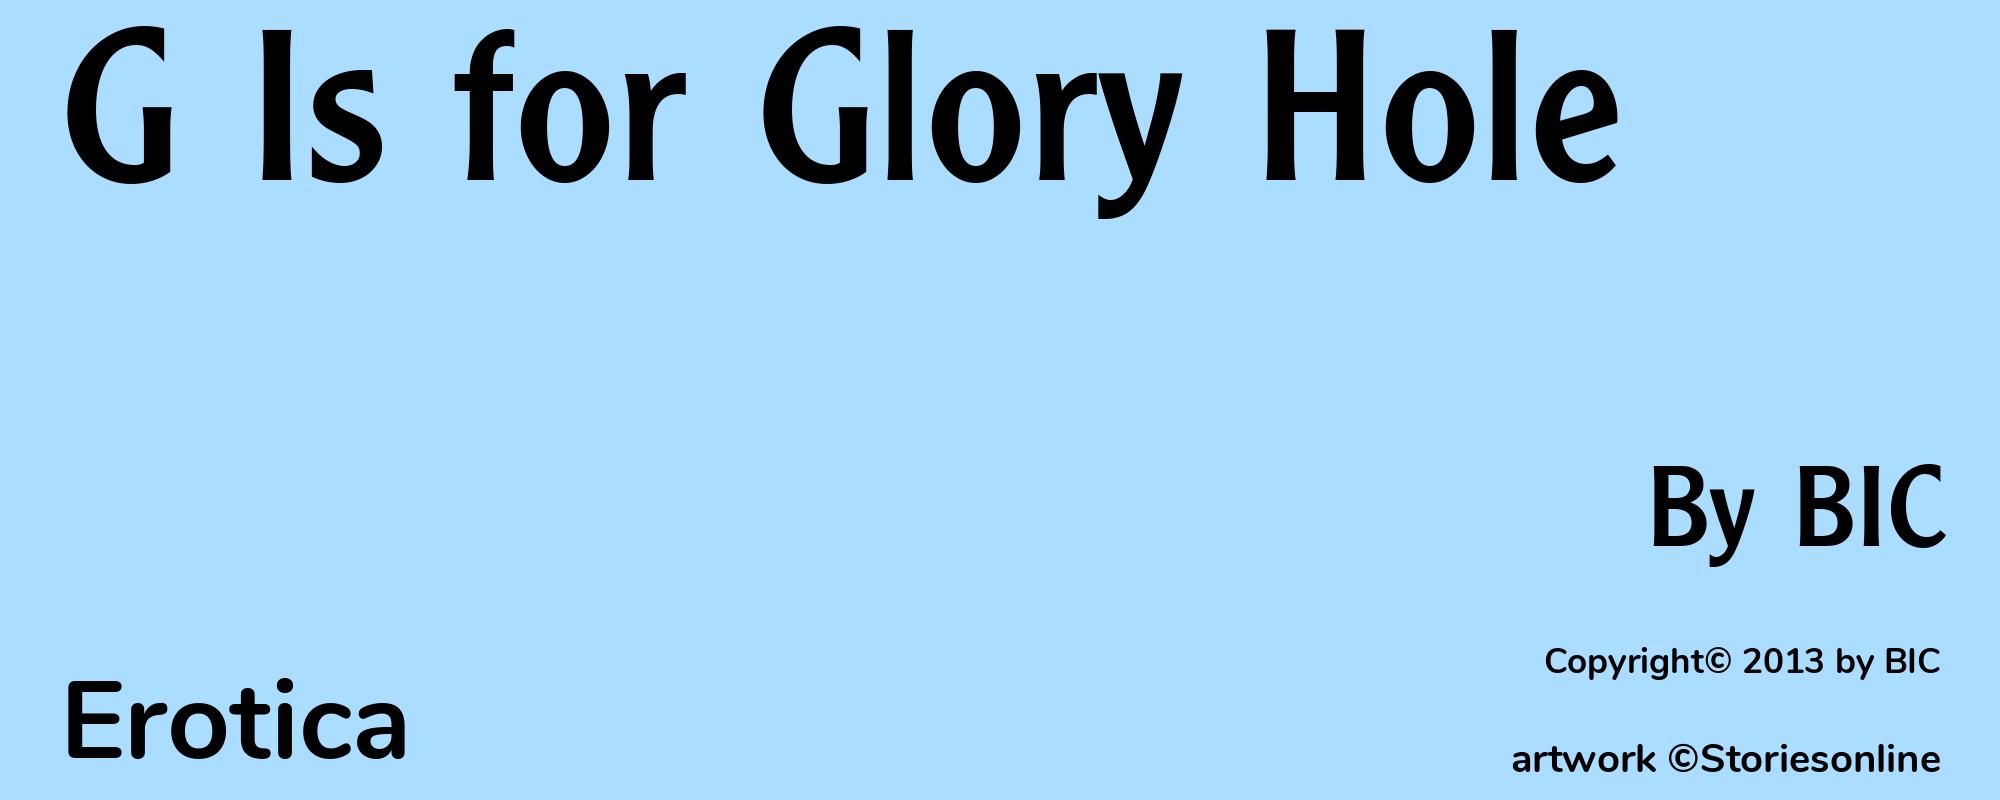 G Is for Glory Hole - Cover